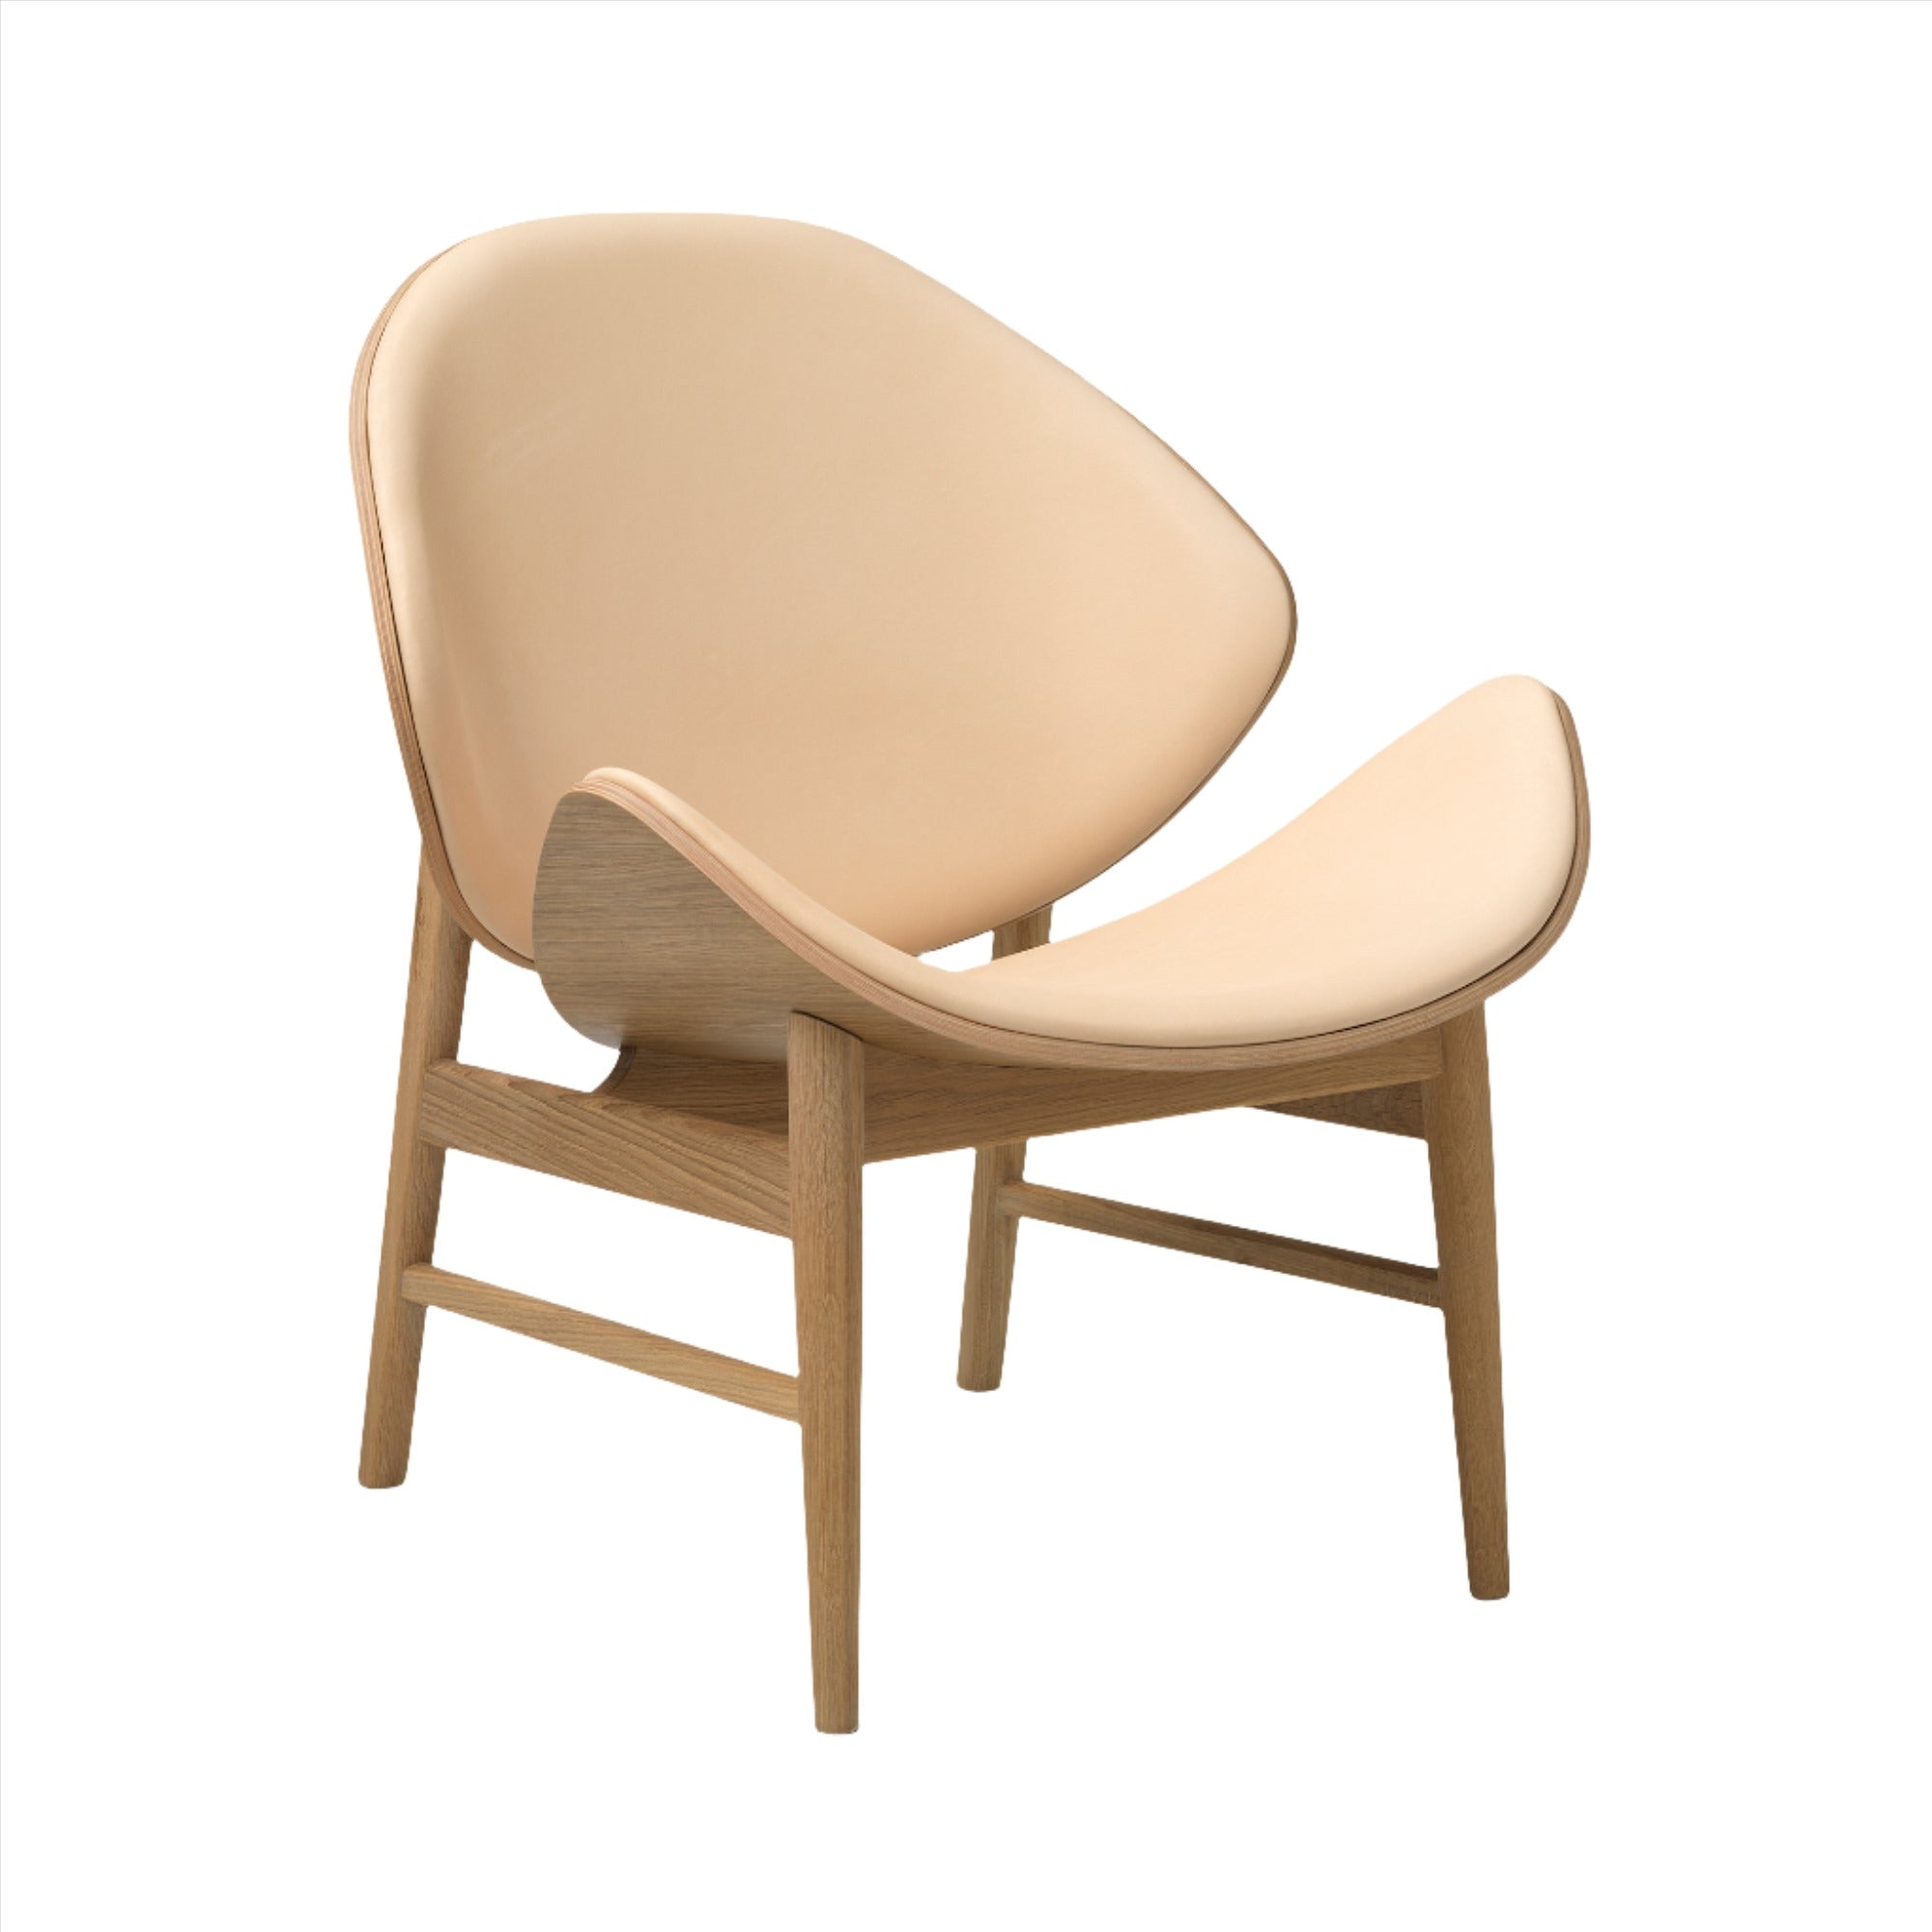 The Orange Lounge Chair: Seat + Back Upholstered + White Oiled Oak